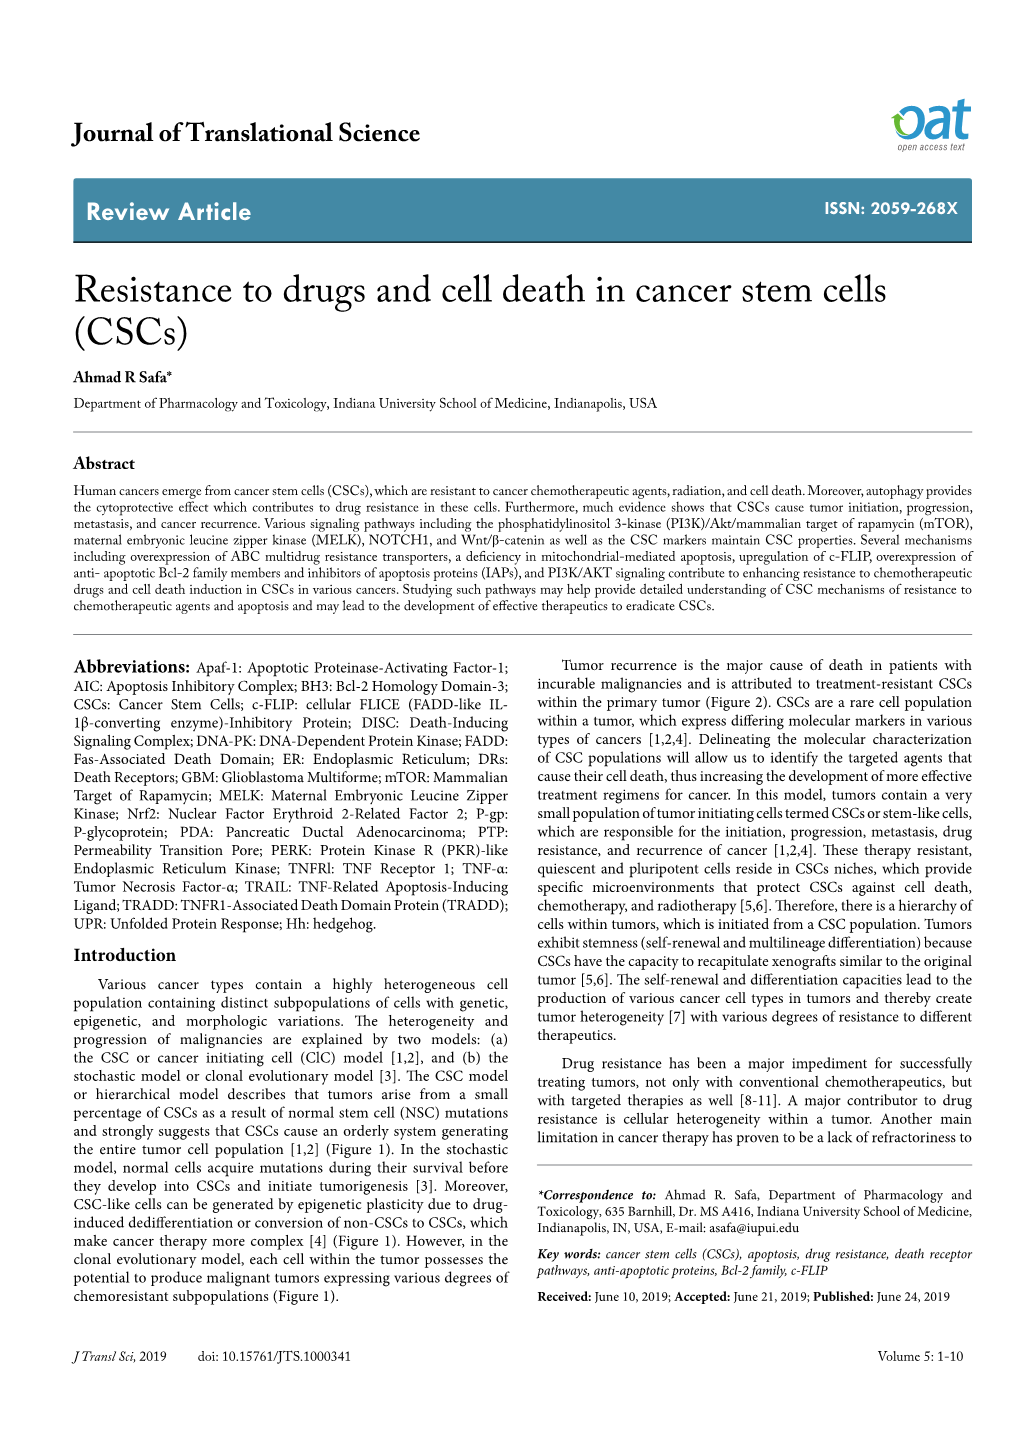 Resistance to Drugs and Cell Death in Cancer Stem Cells (Cscs)